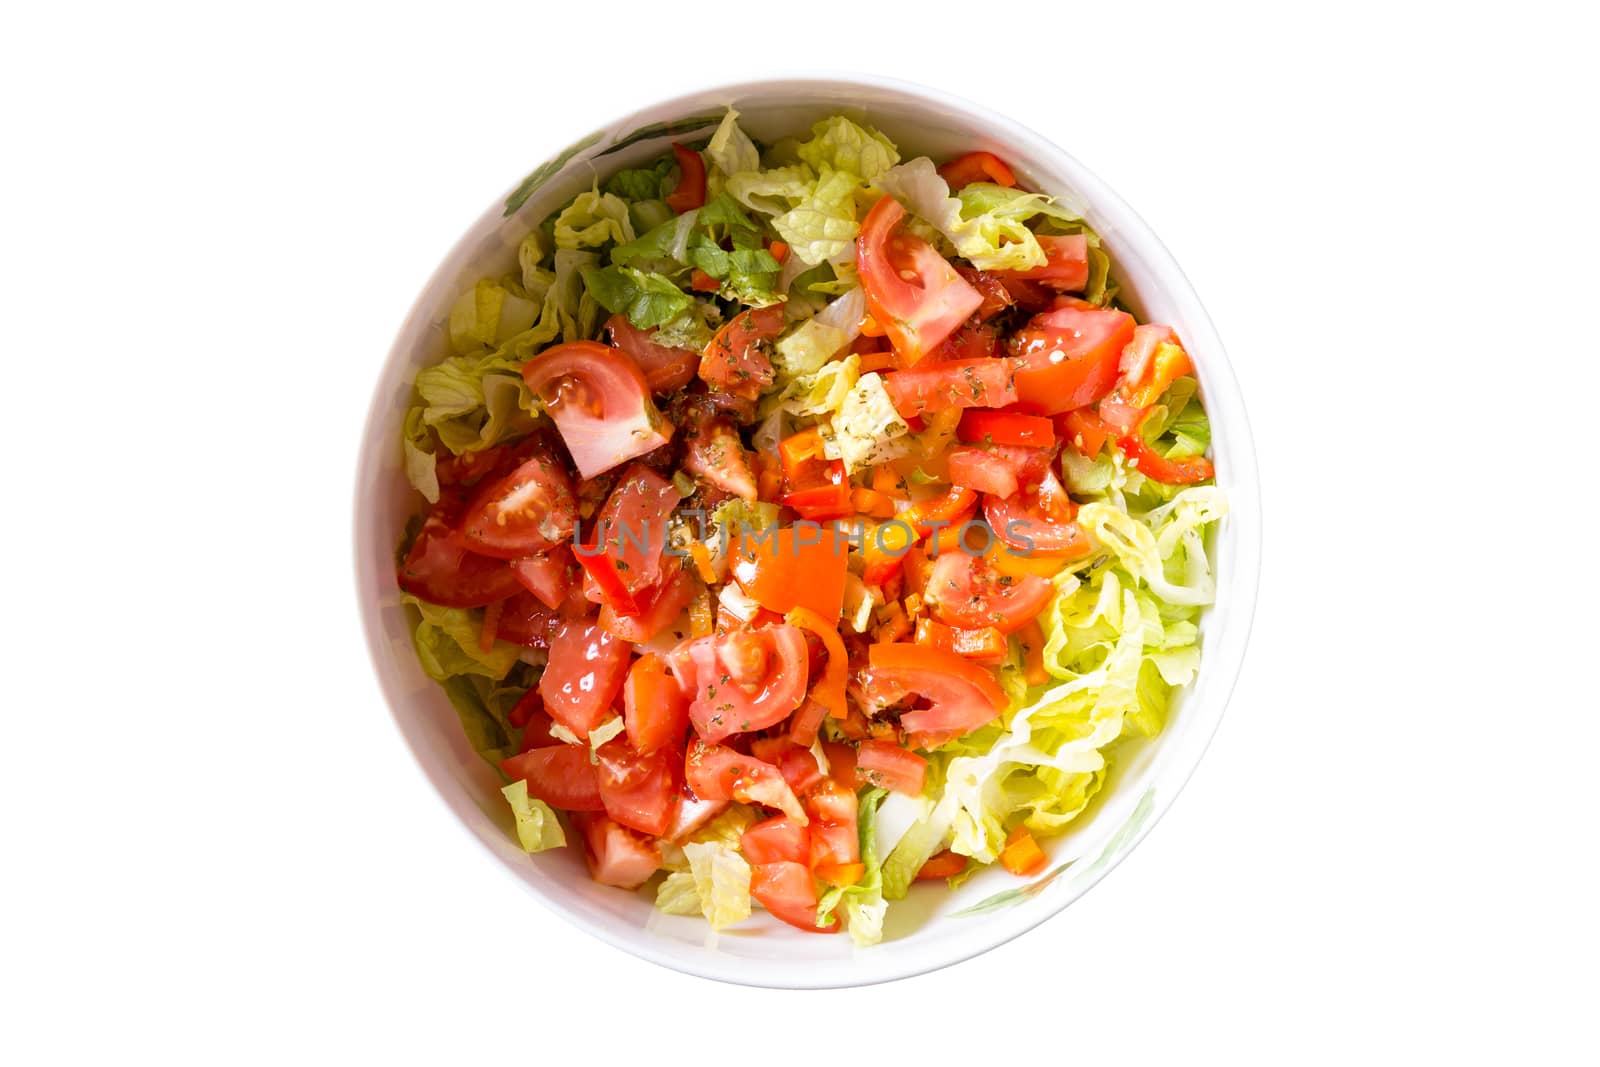 High Angle View of Gourmet Fresh Healthy Tomato and Cabbage Salad on a Bowl, Isolated on White Background.